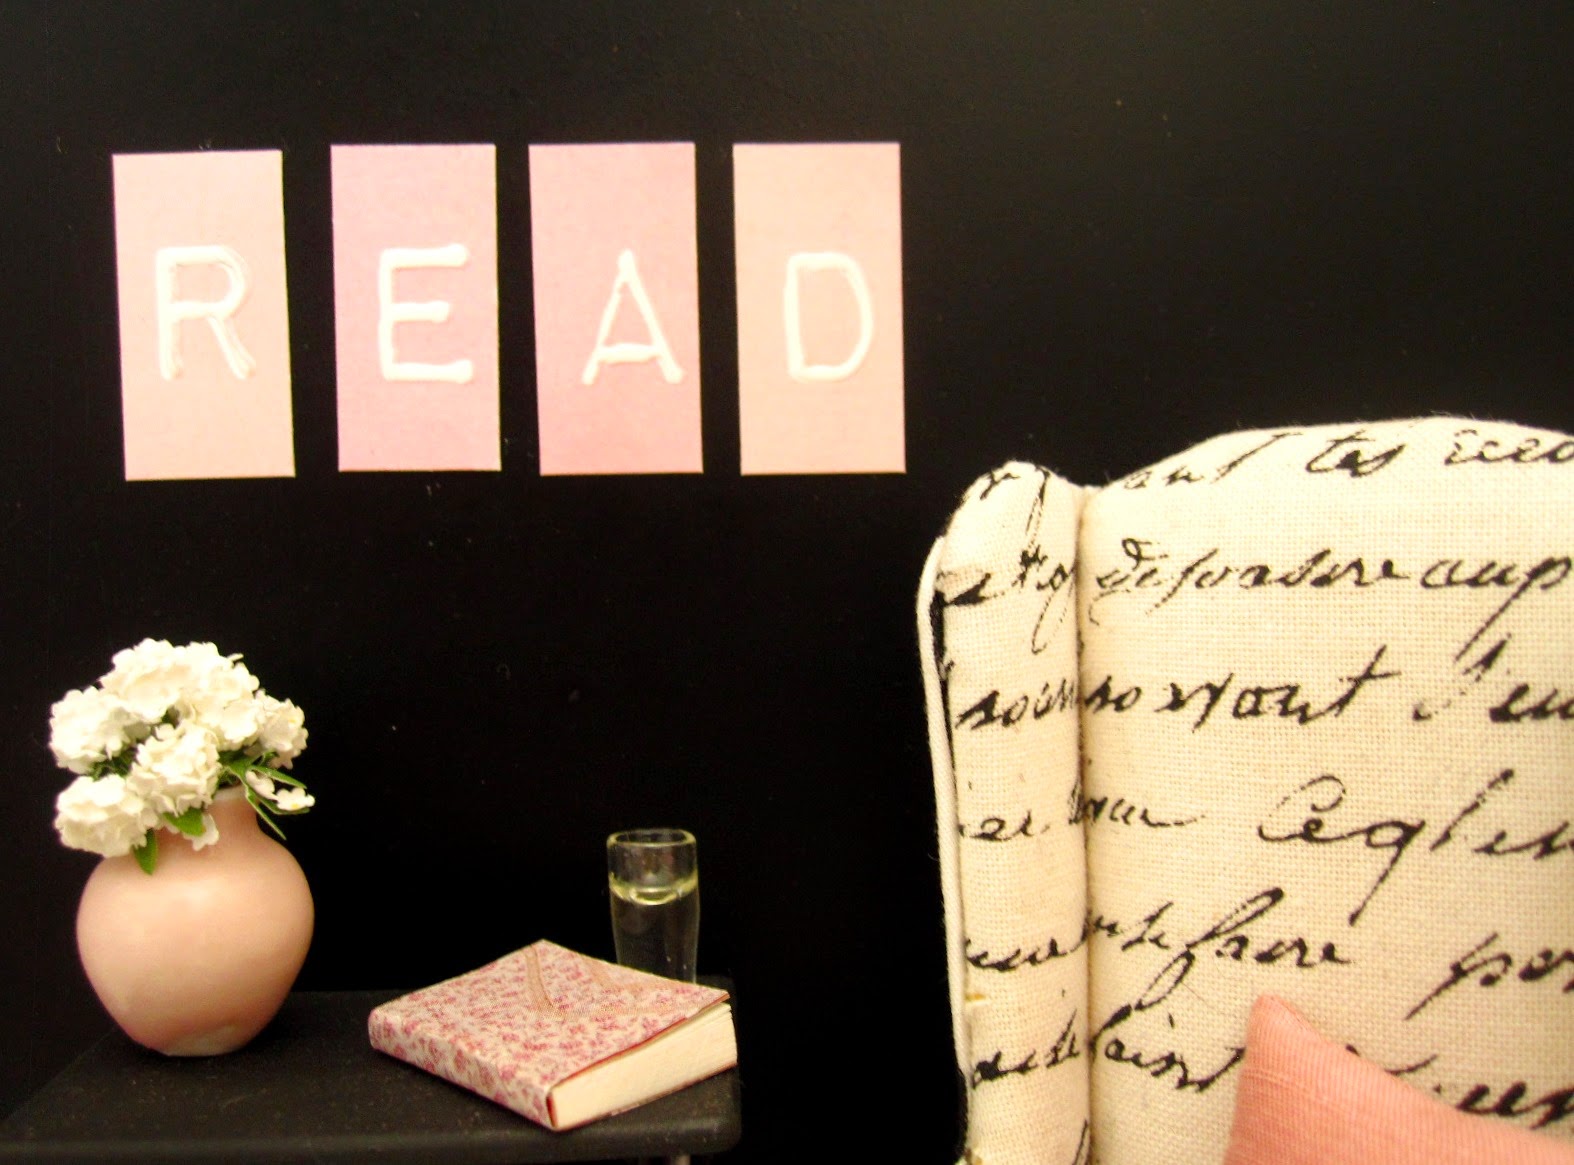 Modern doll's house miniature scene of a black and white wing chair against a black wall. On the wall are the letters R,E,A and D in pink and white and on the table under them is a pink vase with white flowers, a book and a glass of water.